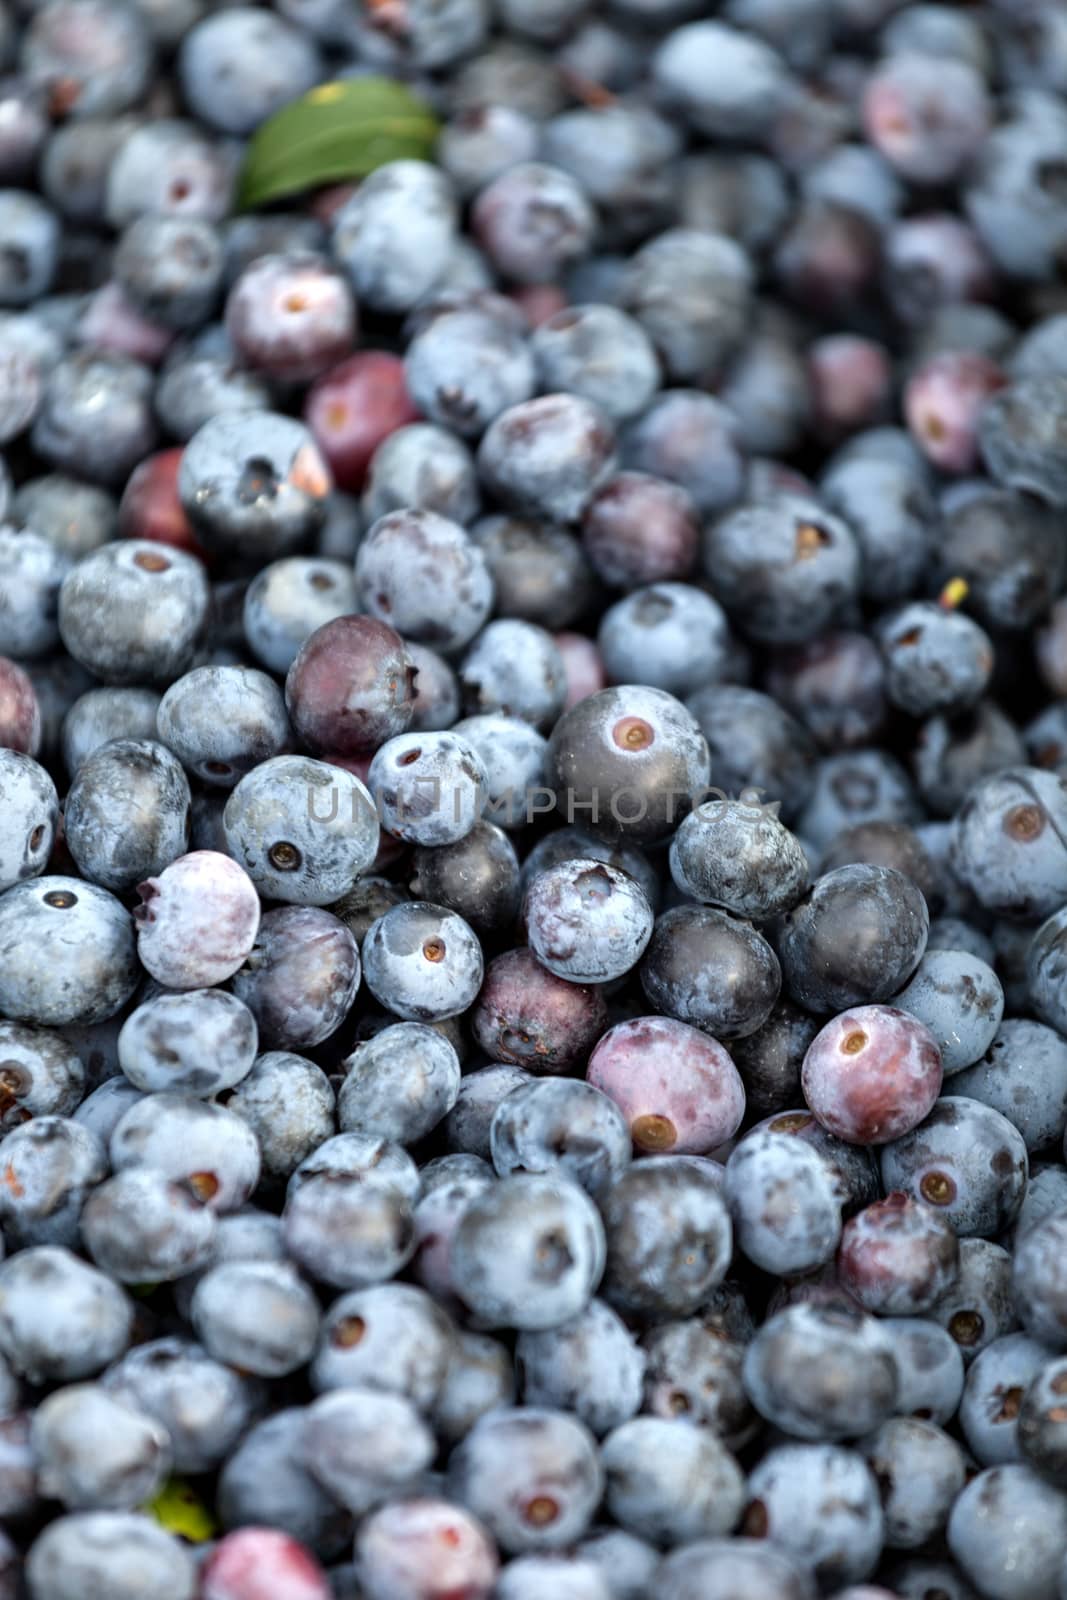 Blueberries Closeup by graficallyminded